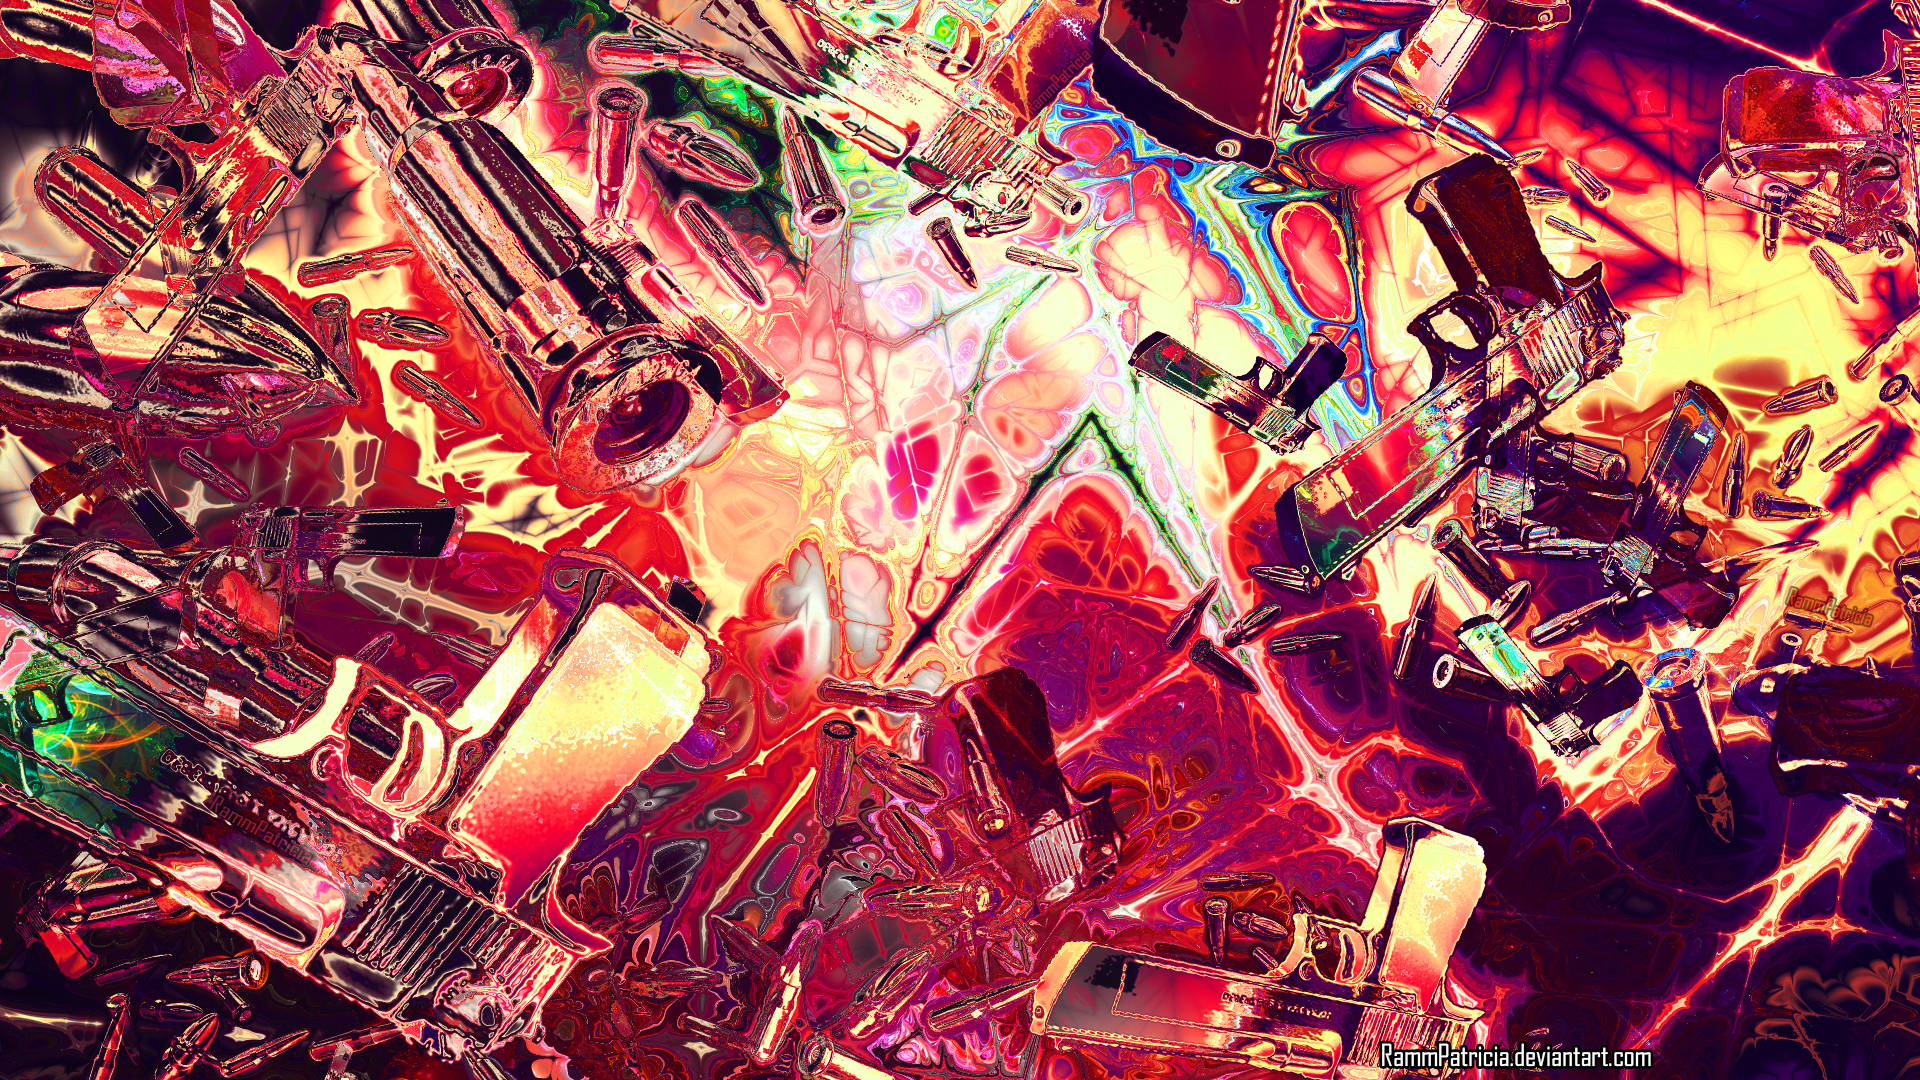 General 1920x1080 RammPatricia digital art abstract weapon gun ammunition shell casing bullet colorful pistol trippy psychedelic watermarked